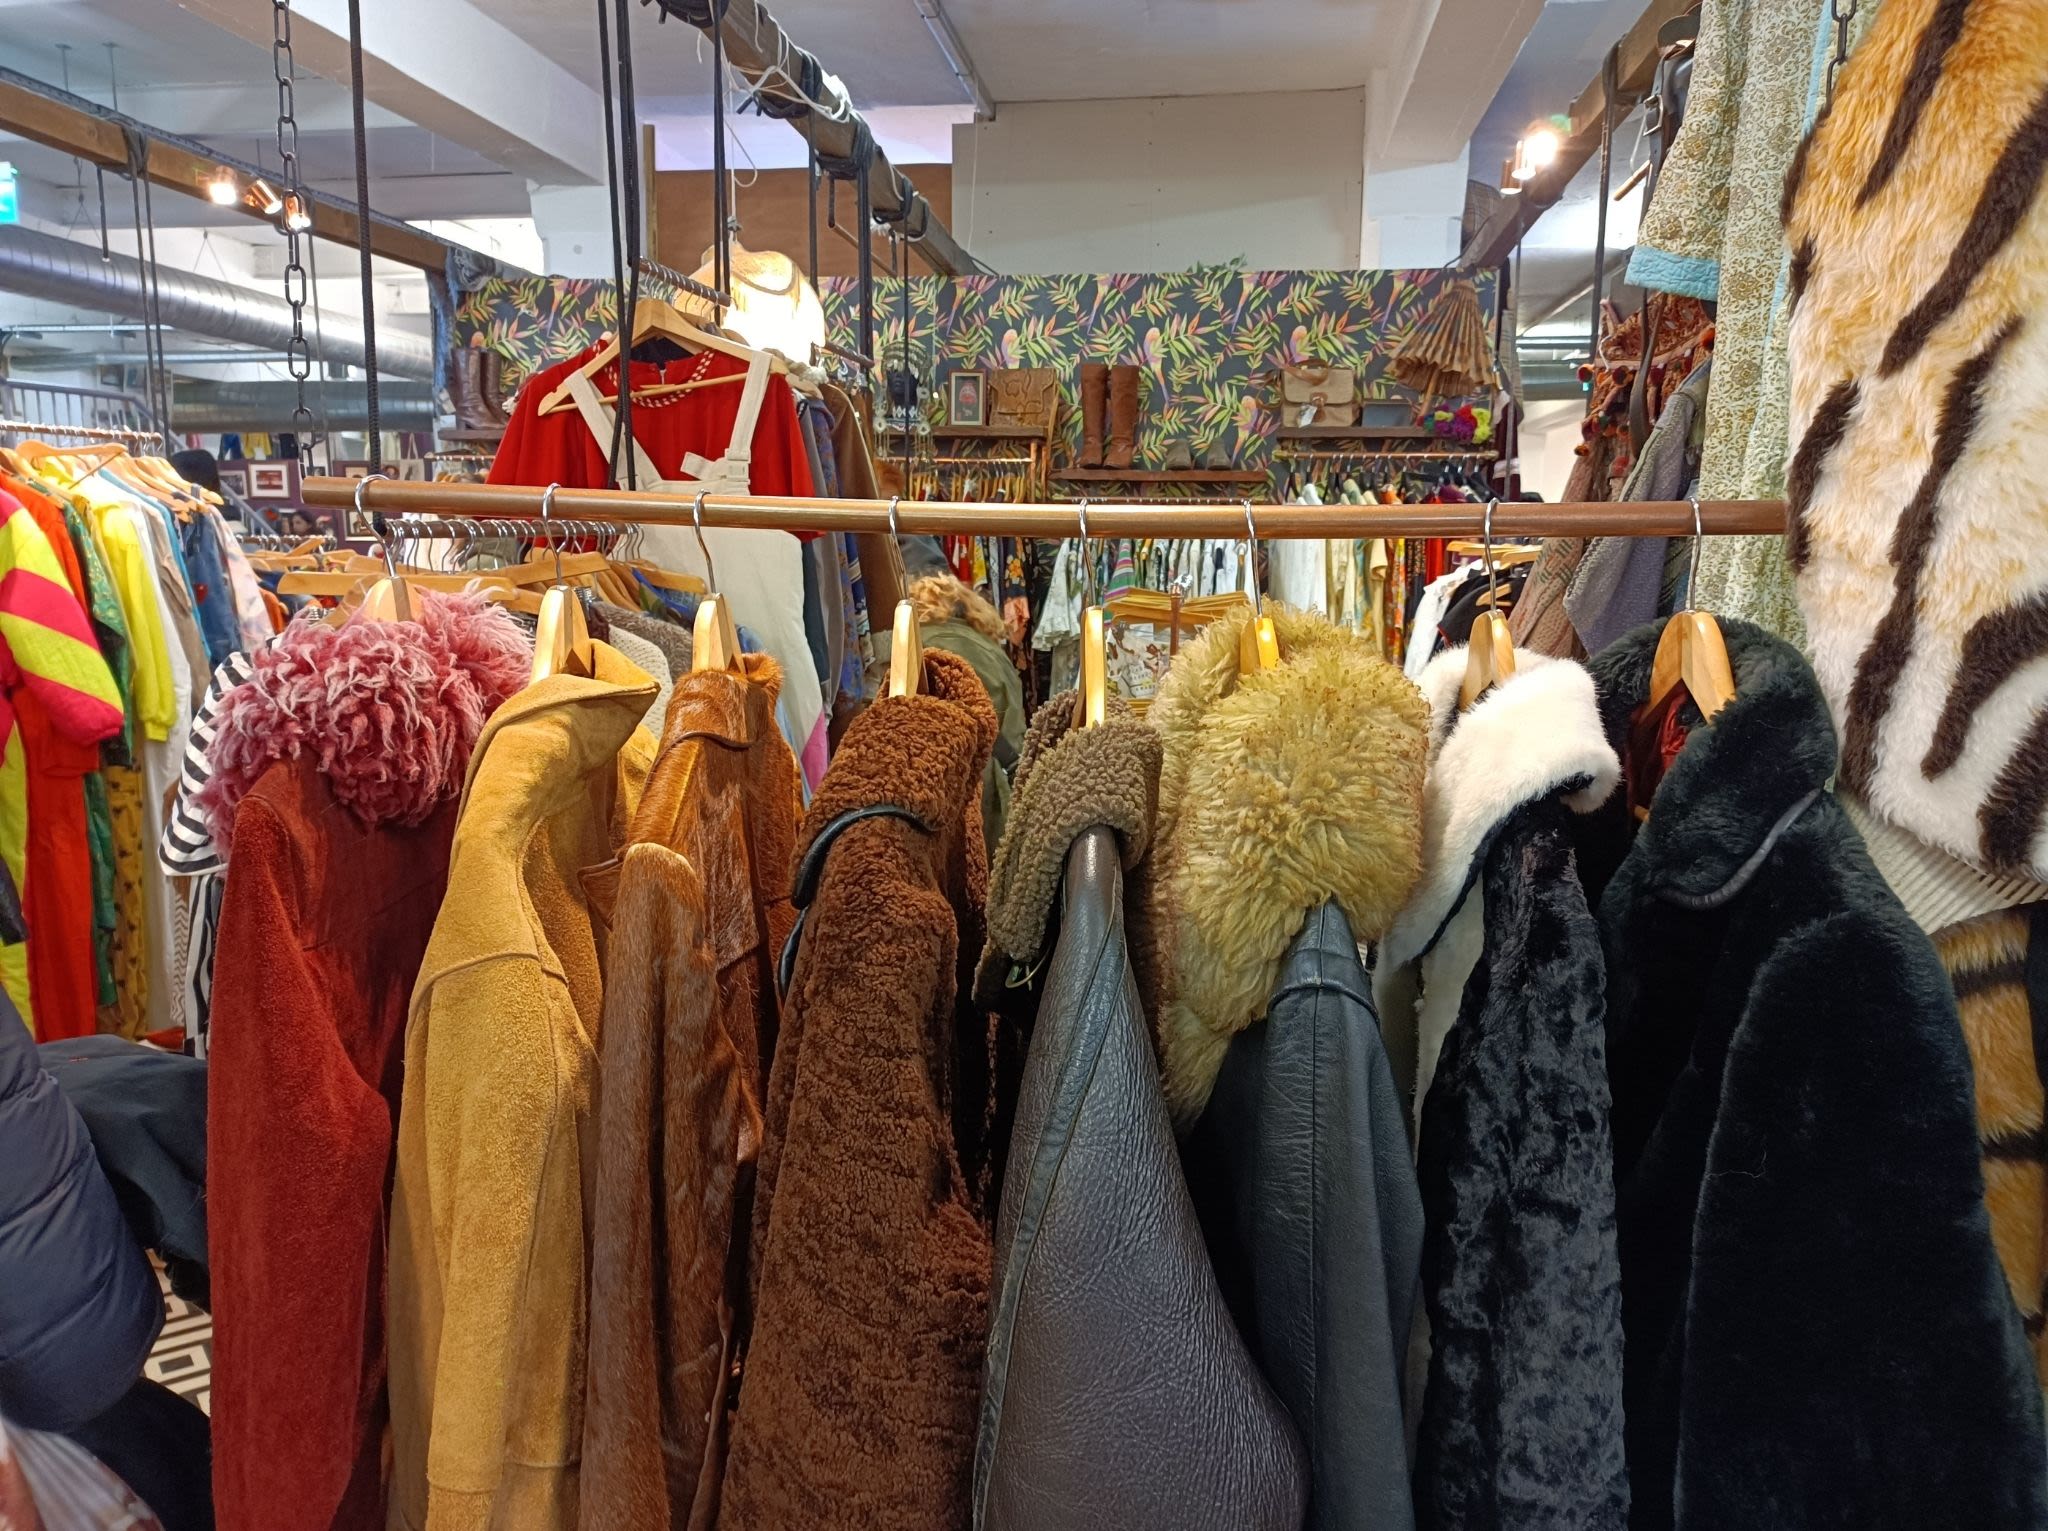 A rack of leather and fur-collared coats in red, brown and black, with a vintage clothing stalls in the background.